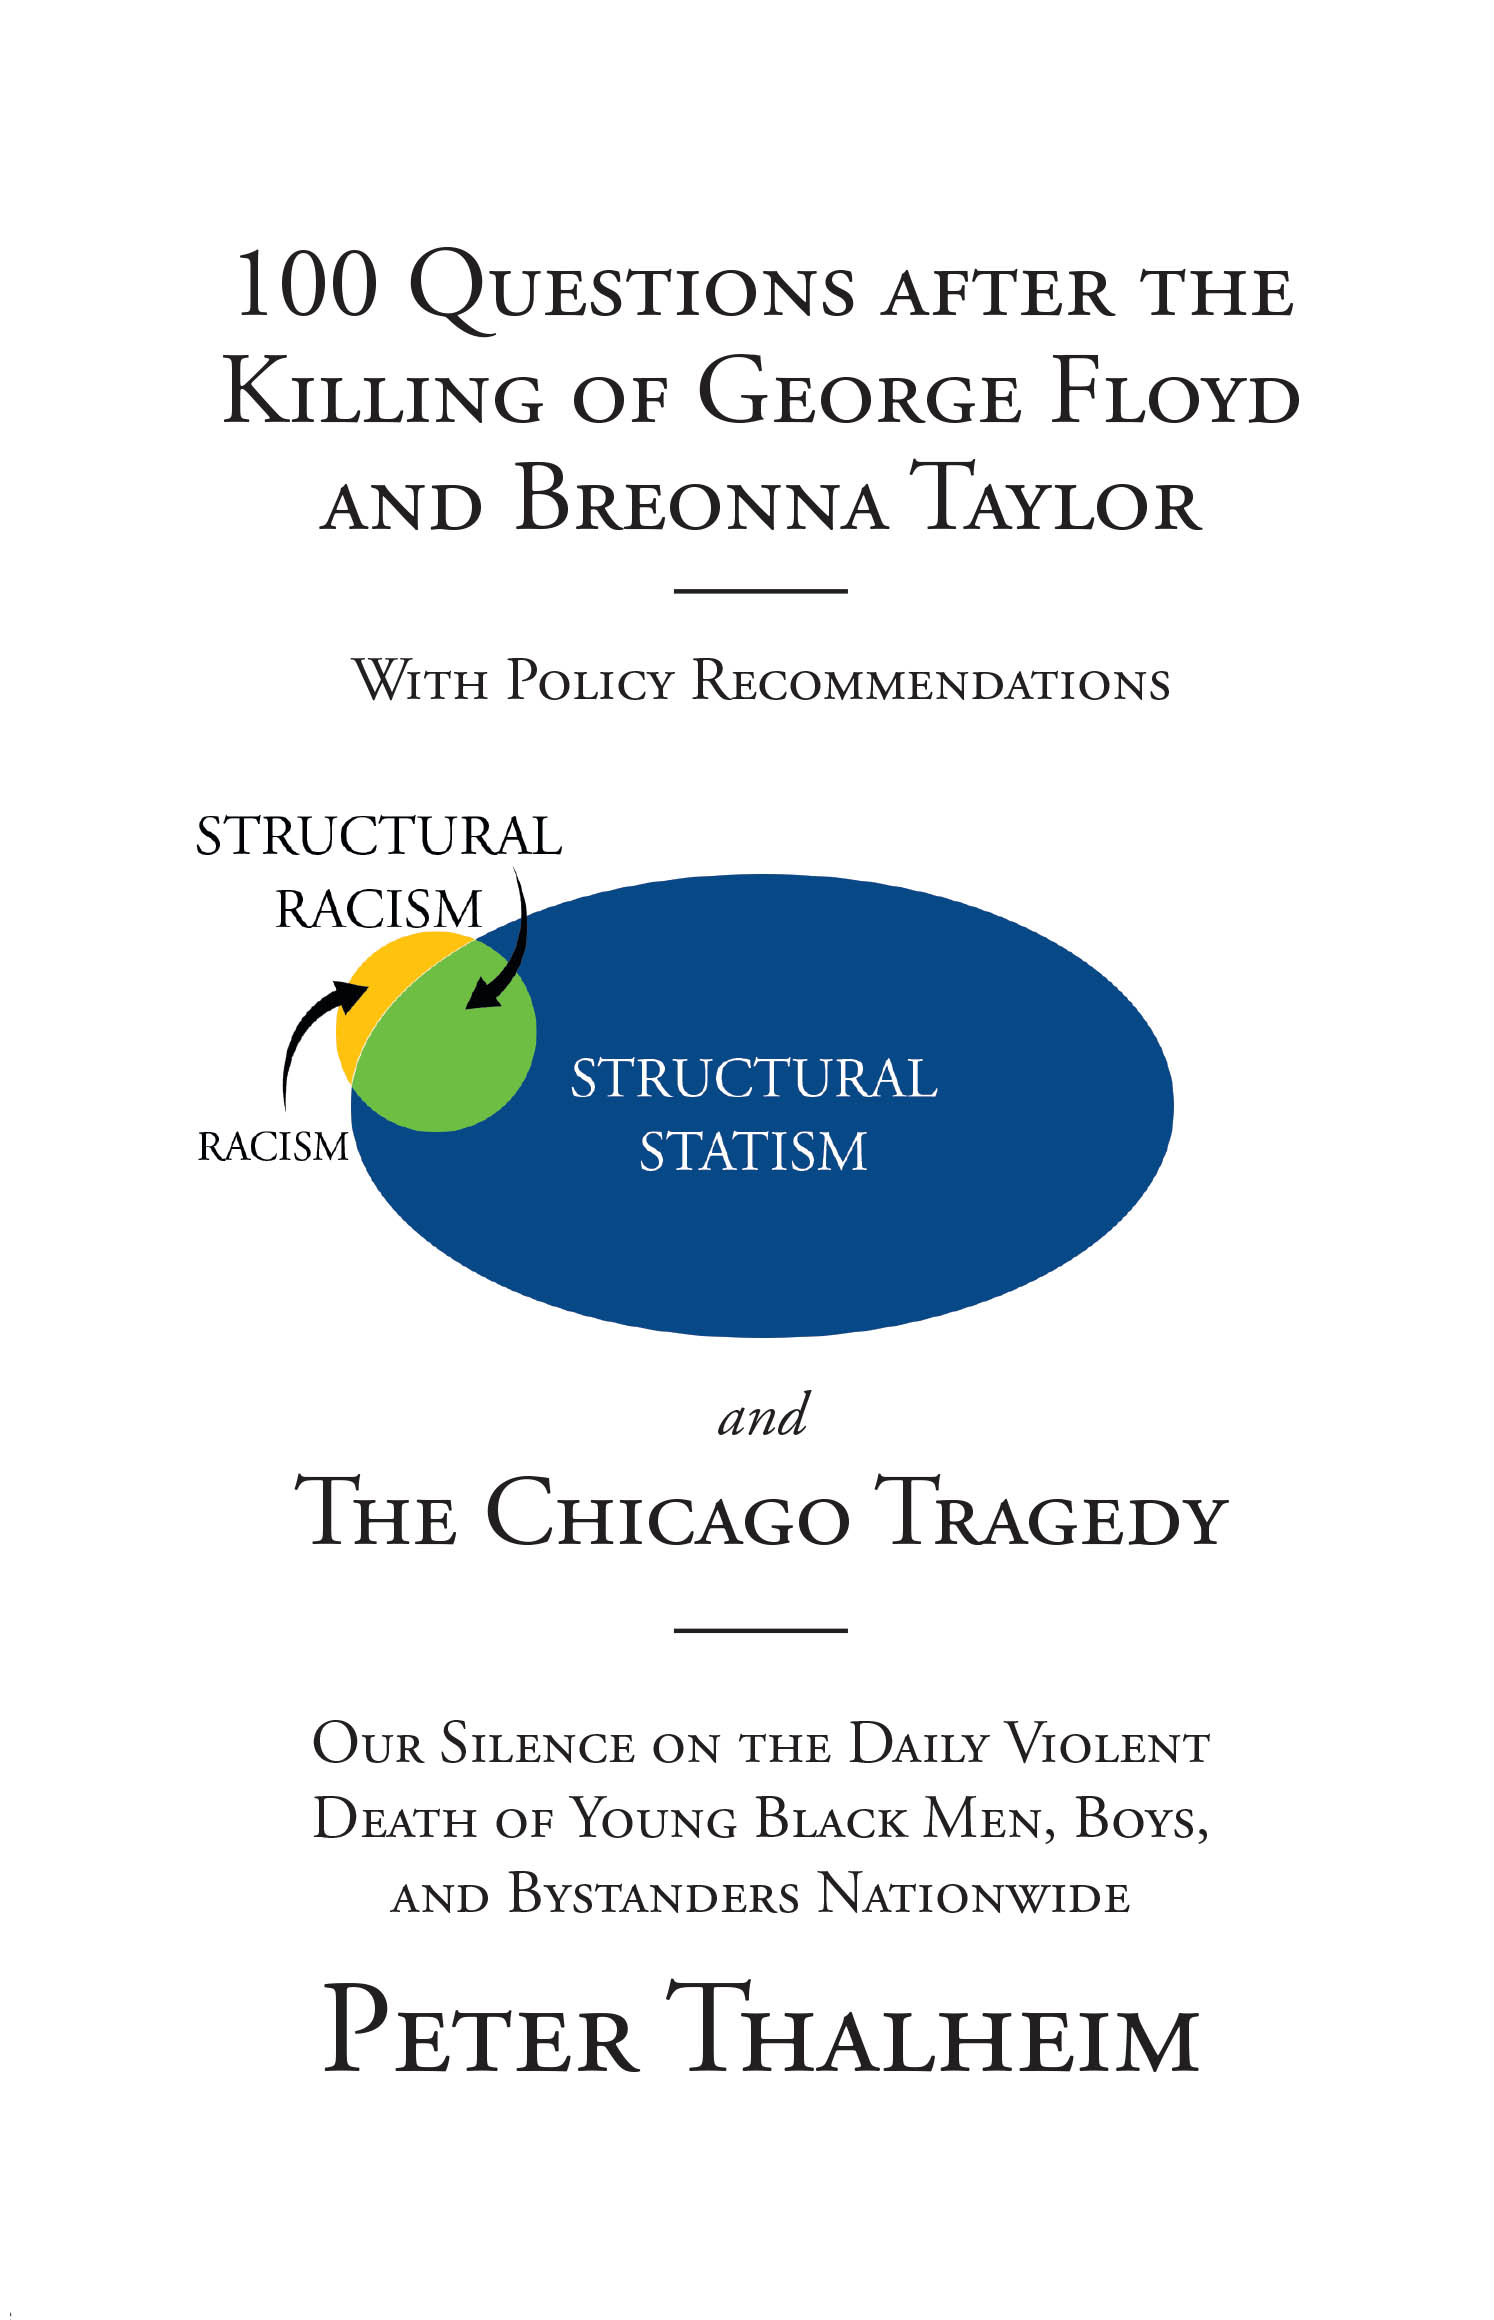 Peter Thalheim’s New Book, "100 Questions After the Killing of George Floyd and Breonna Taylor," Details the Ways in Which White Americans Can Work to End Systemic Racism